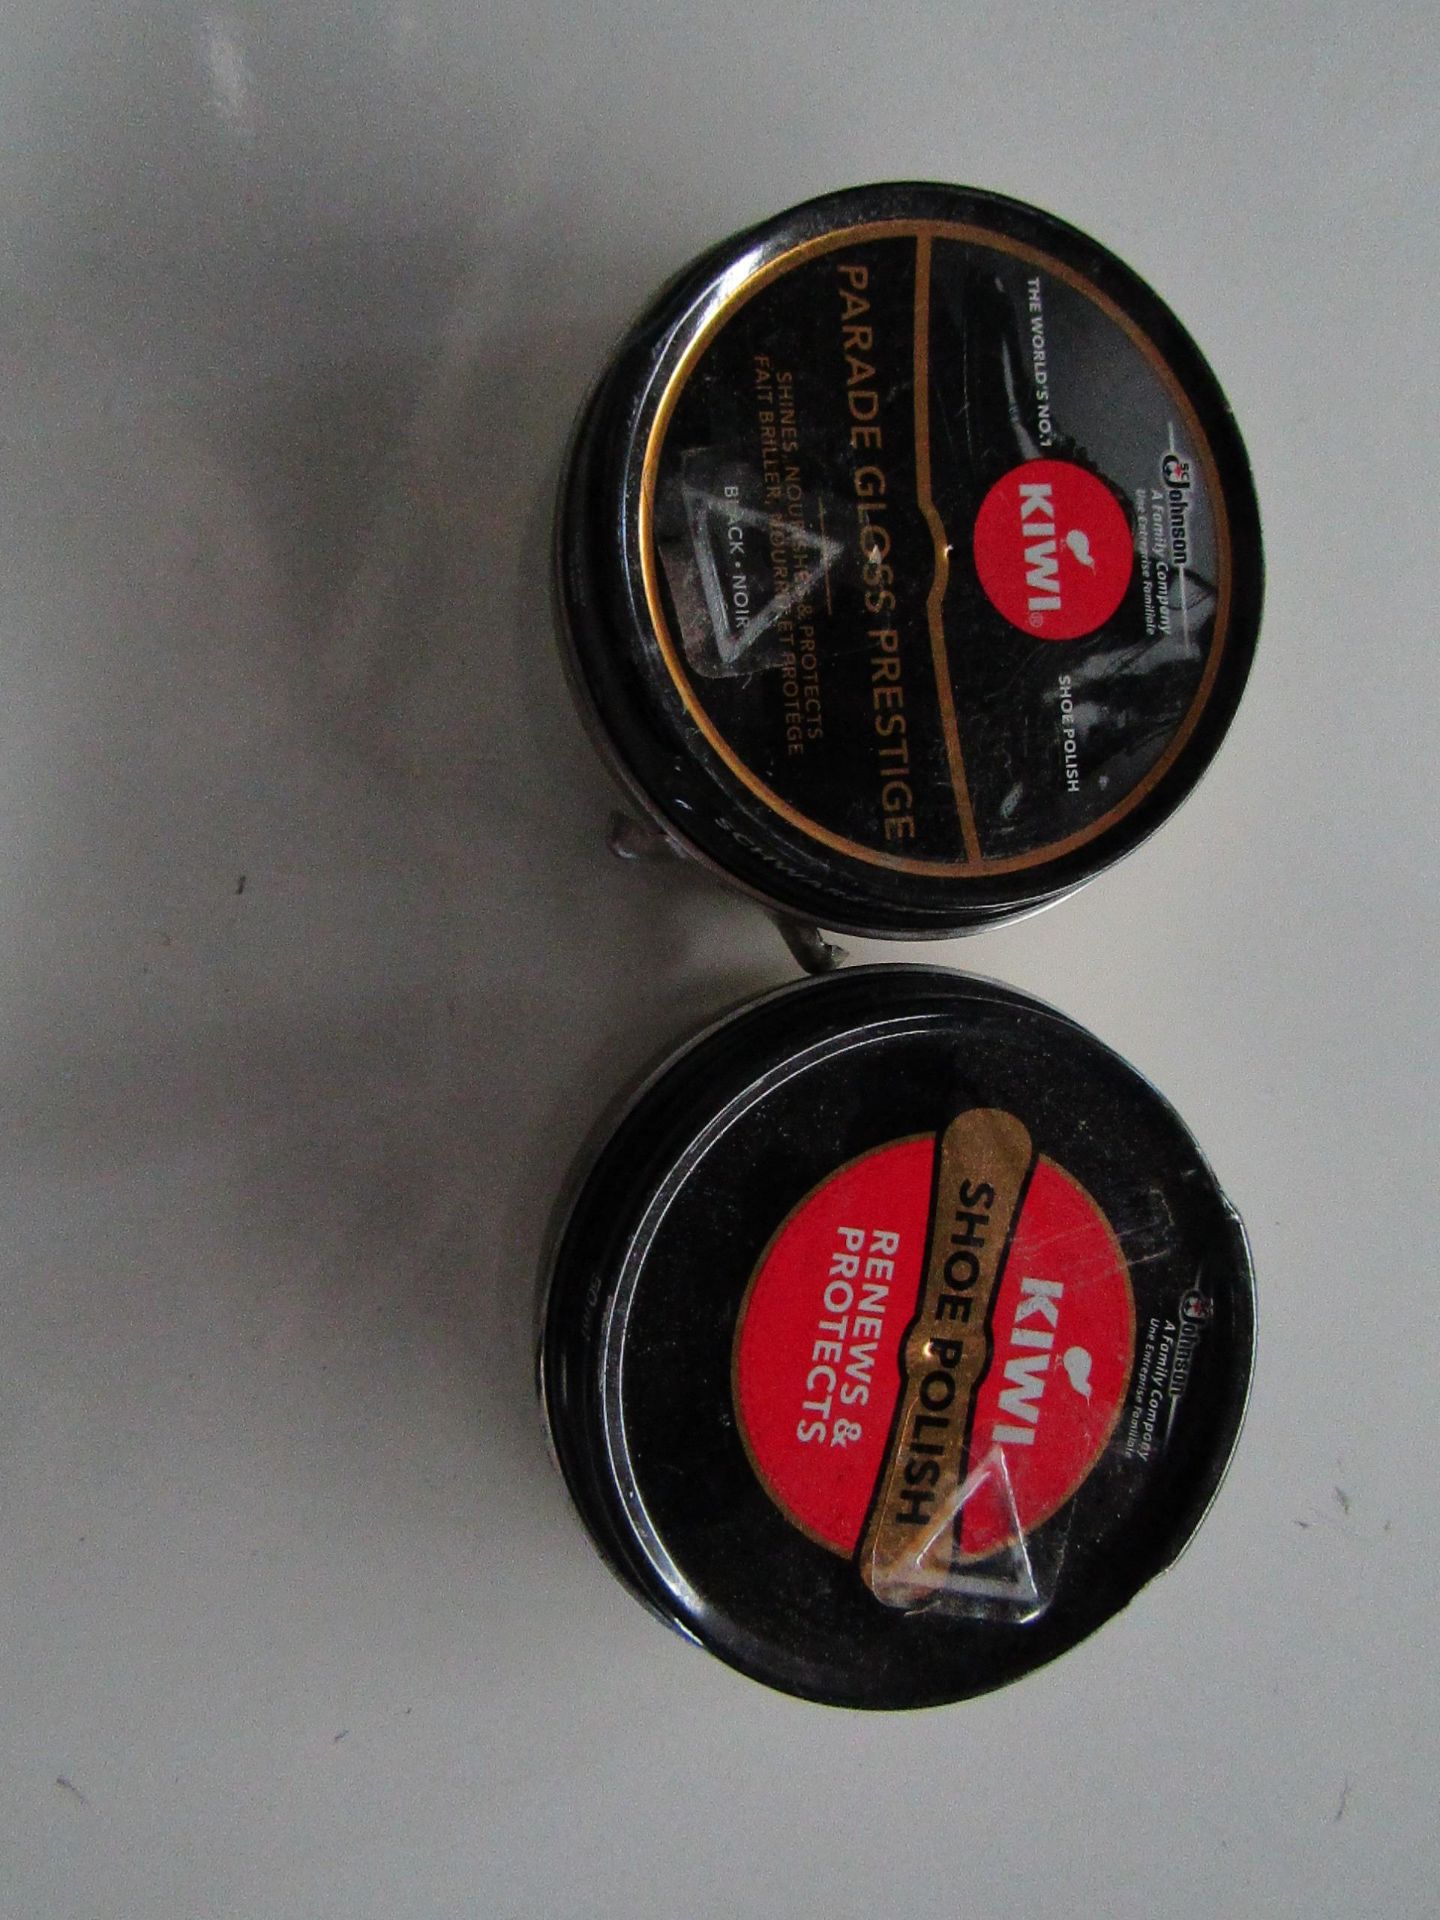 10x Kiwi - Shoe Polish & Parade Gloss - Please Note Will Be Picked At Random From Our Selection.